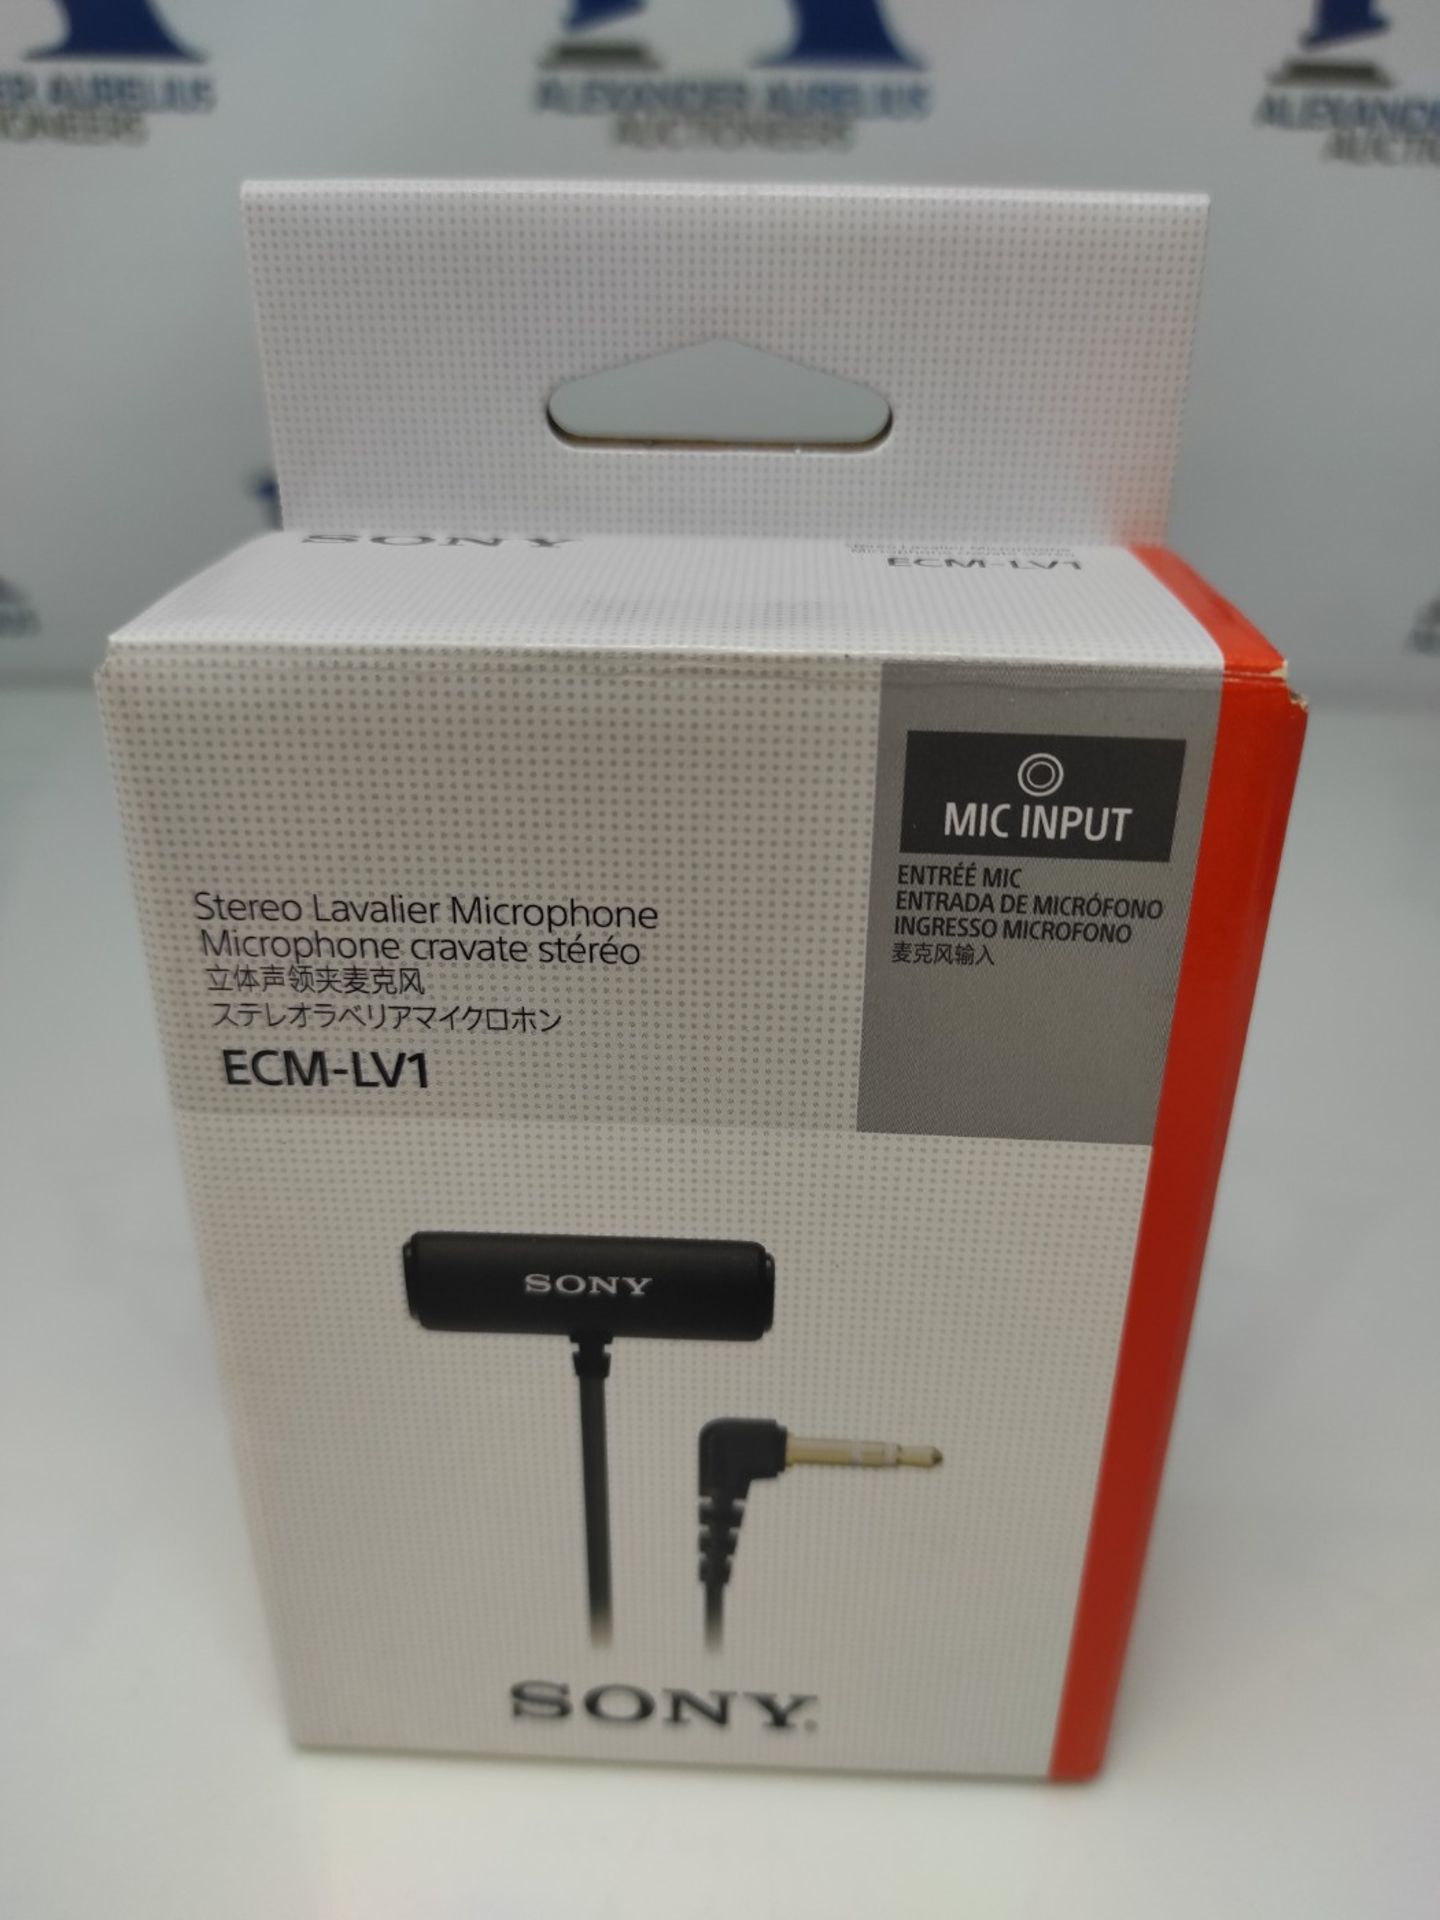 Sony ECM-LV1 - Lavalier Microphone with Stereo Sound Capture, 360° Clothing Clip, for - Image 5 of 6